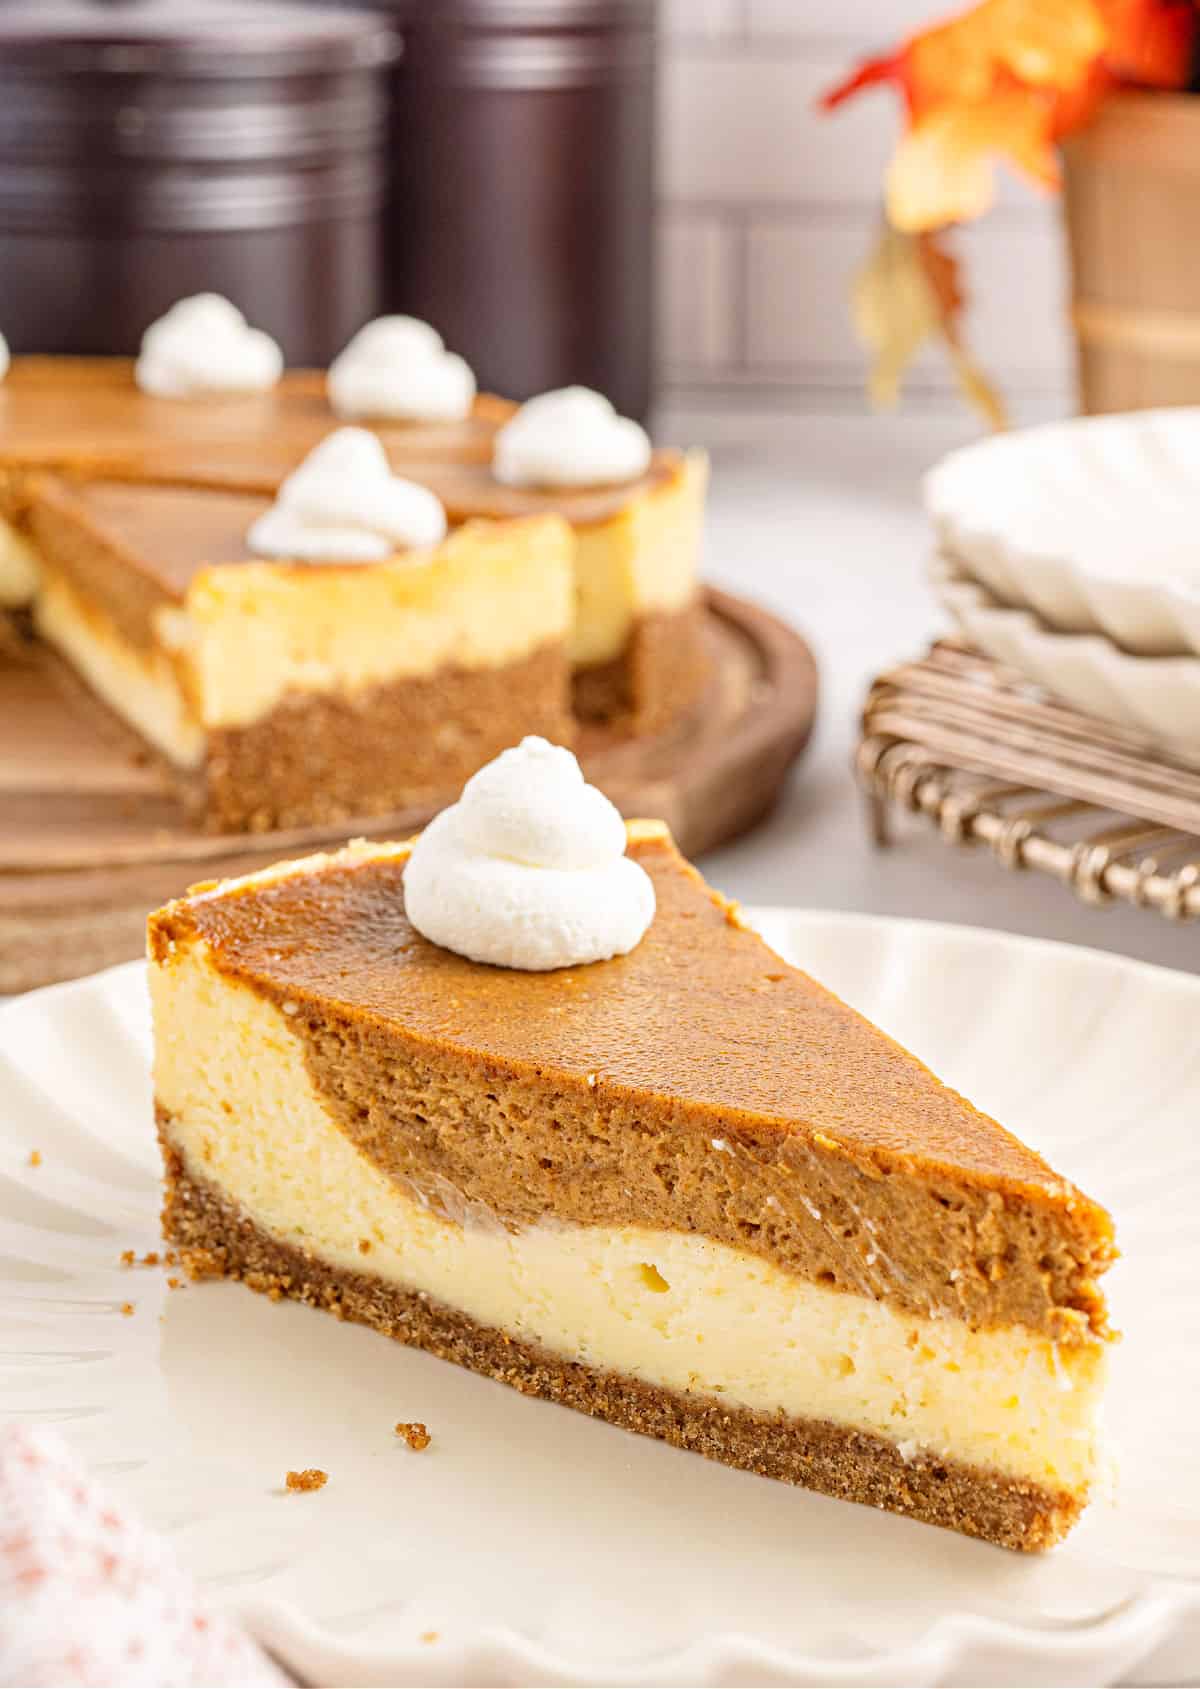 Slice of cheesecake with pumpkin pie swirled throughout.